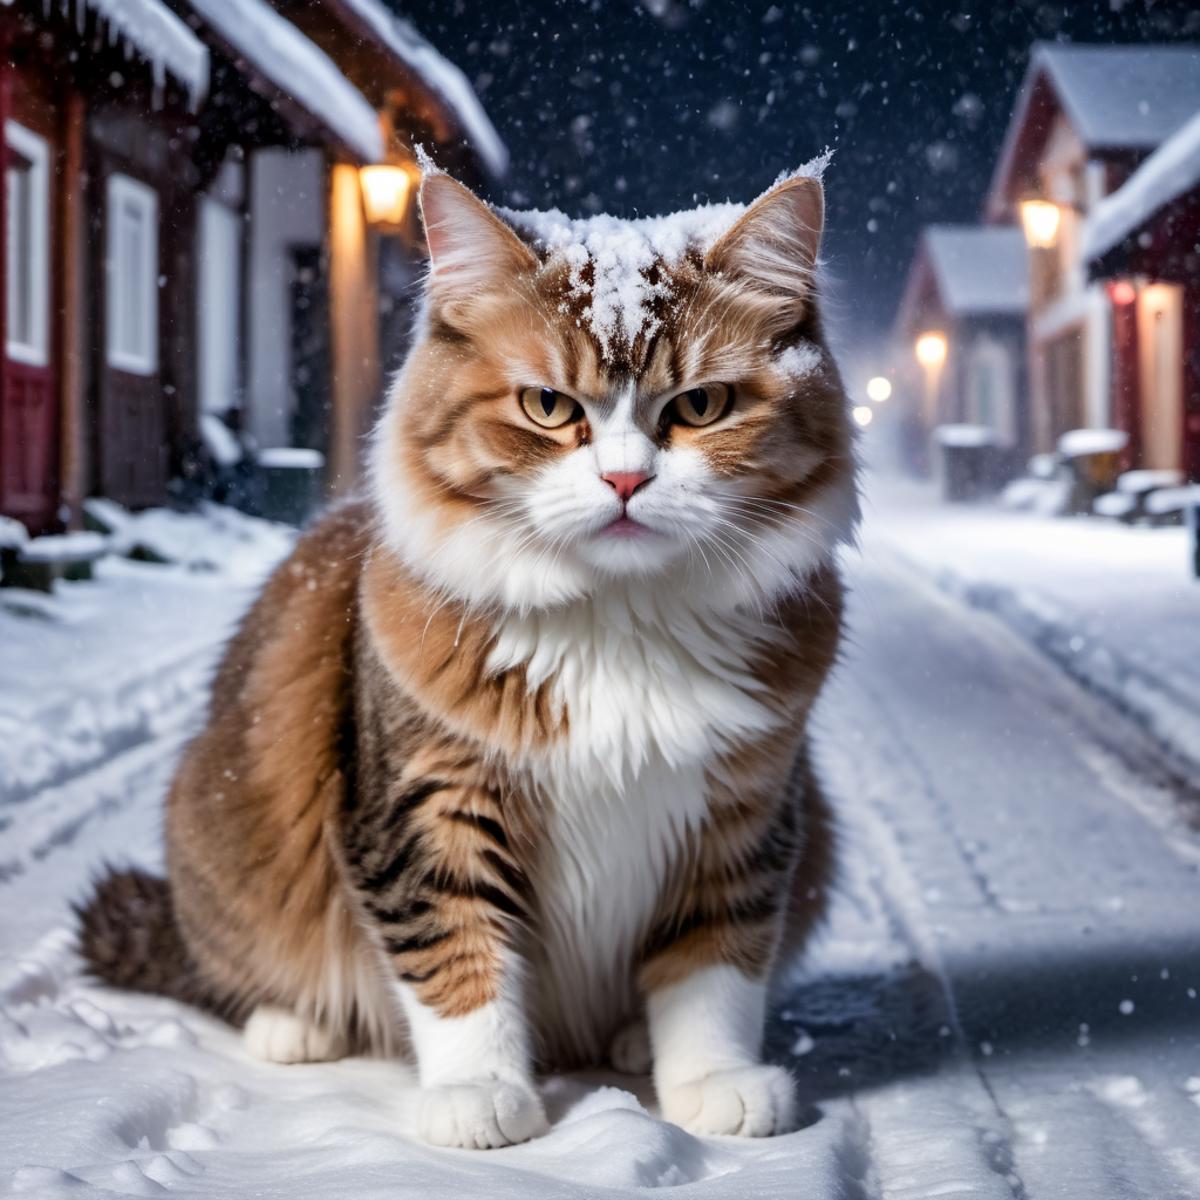 Snowy Cat Staring at the Camera